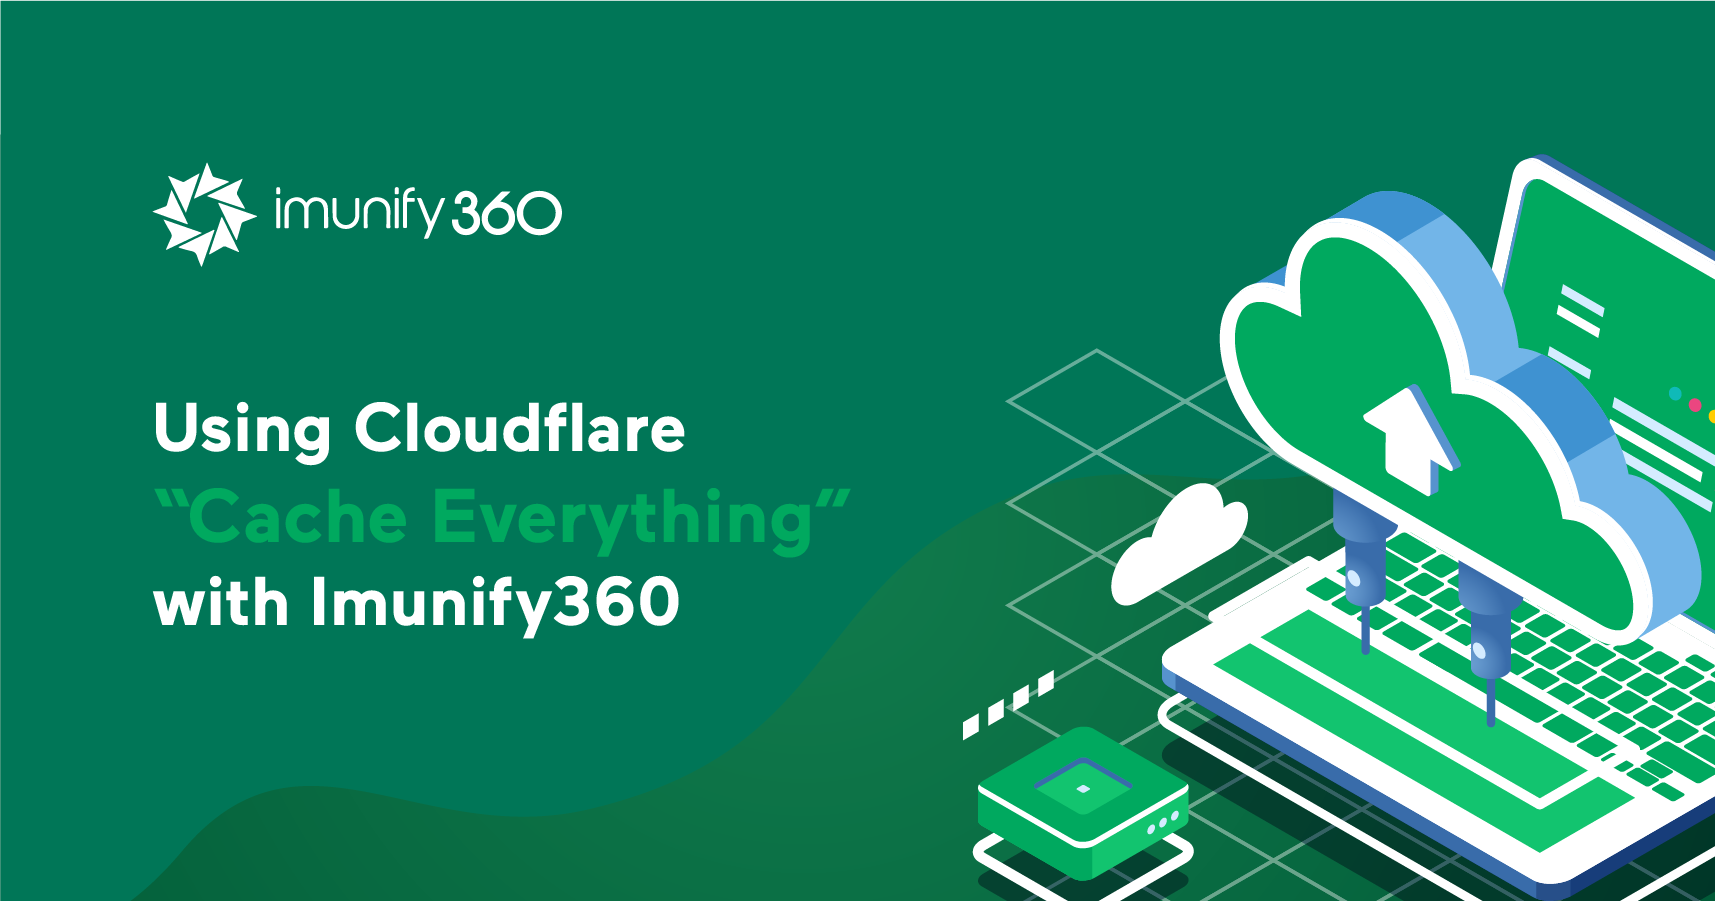 Using Cloudflare “Cache Everything" with Imunify360